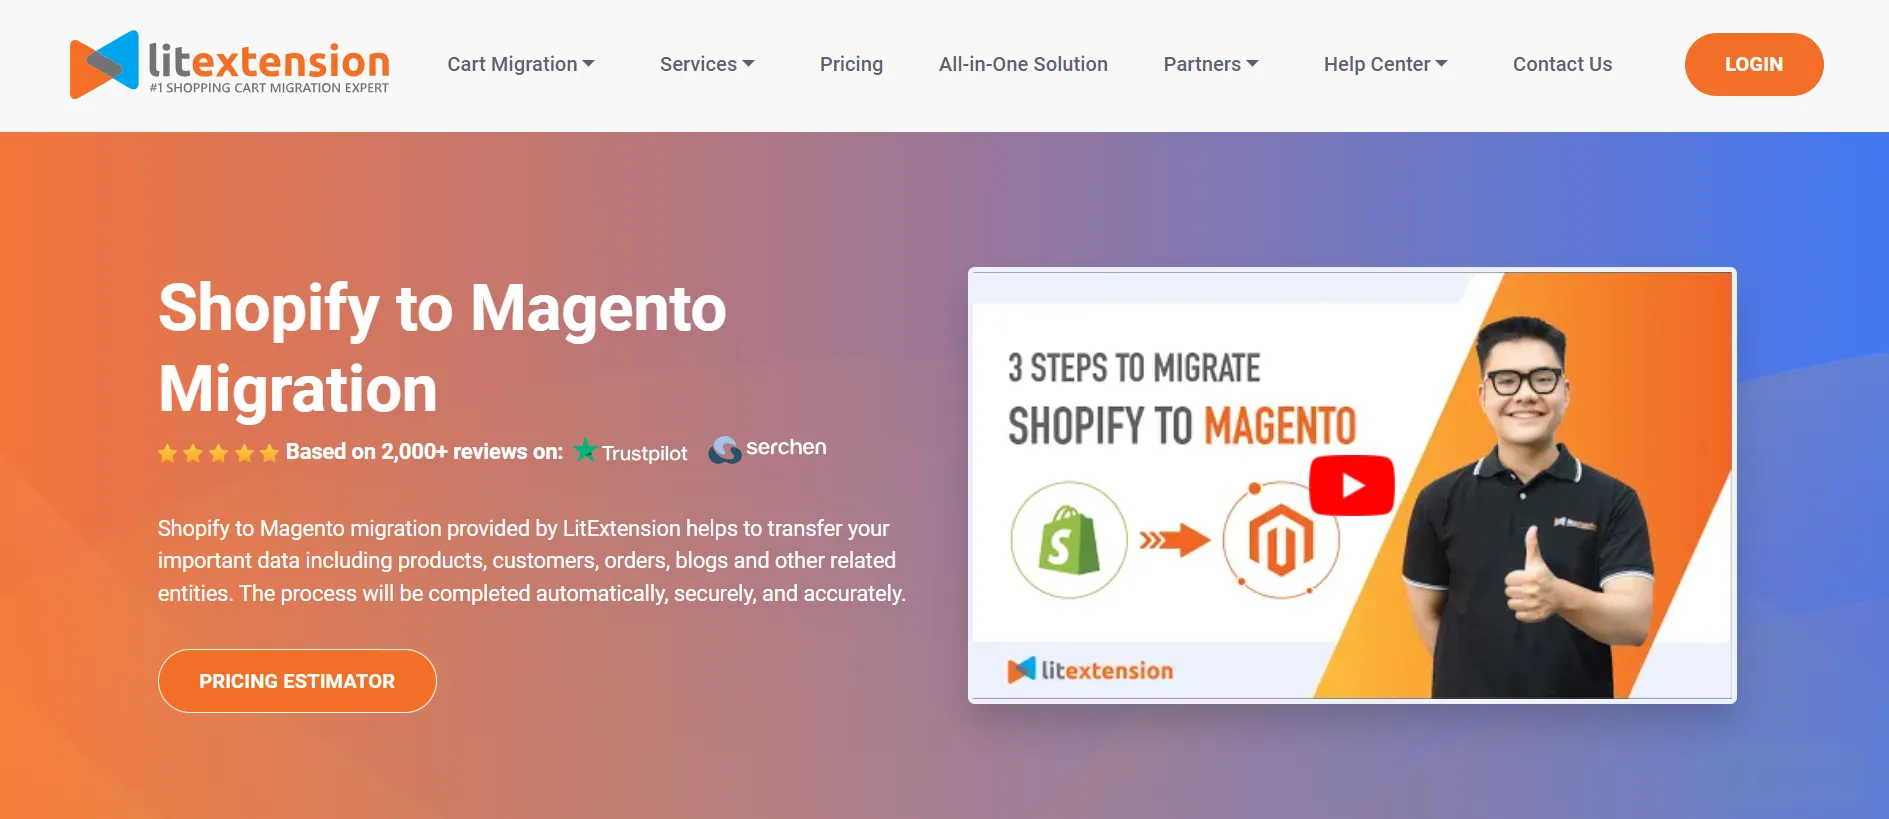 Shopify to Magento with LitExtension